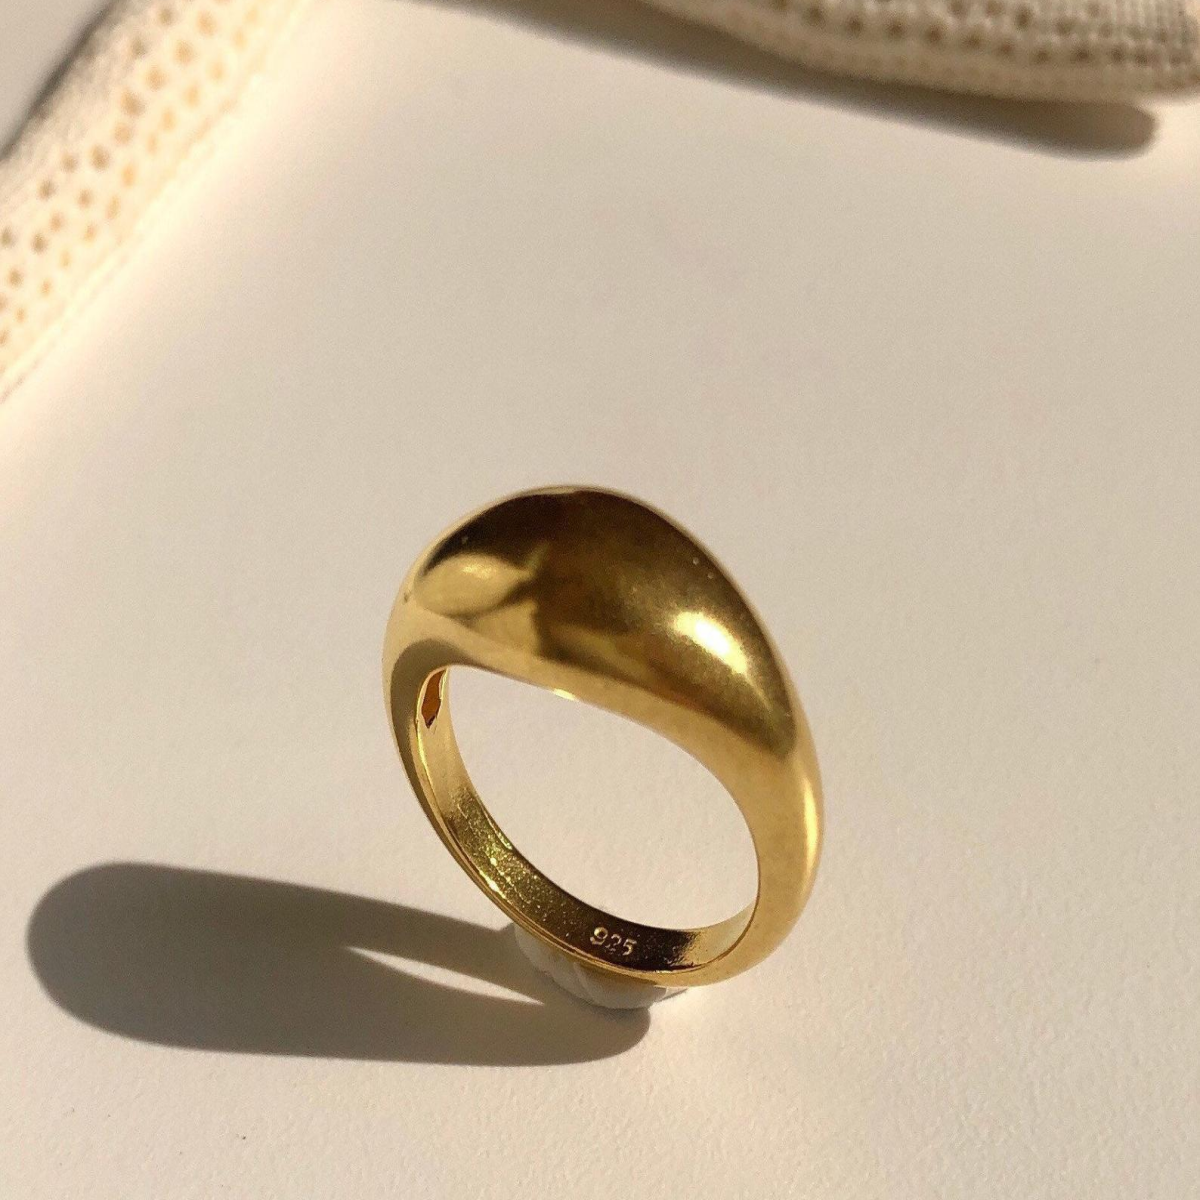 Handmade 18k Gold Plated Minimal Dome Ring from Australia for Everyday Wear